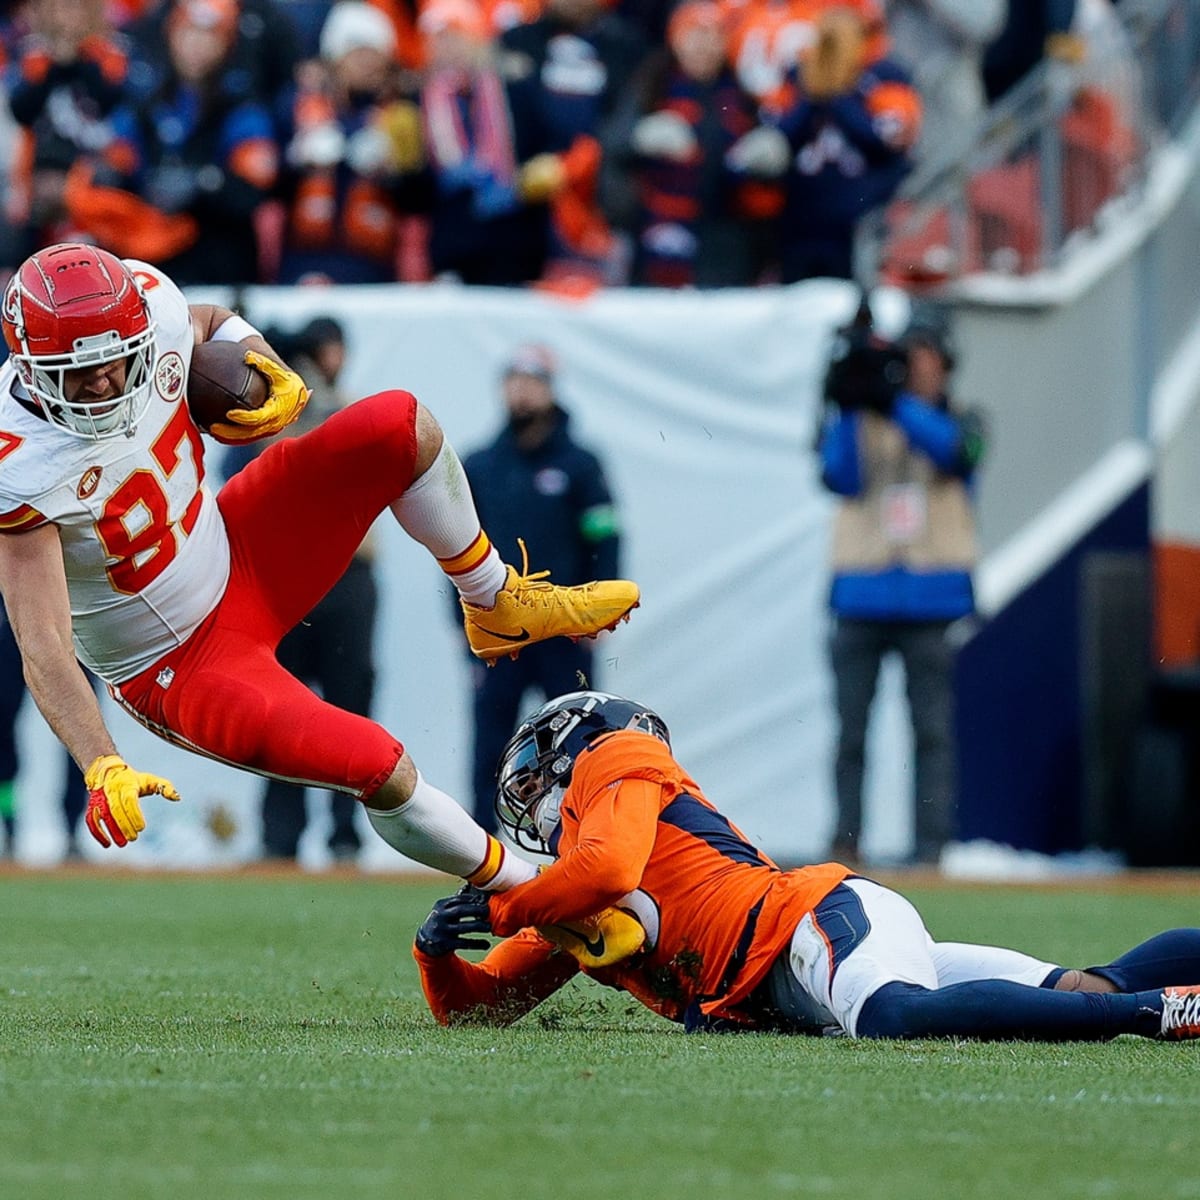 It Takes Travis Kelce 'At Least 3 Hours' to Find the Perfect Game